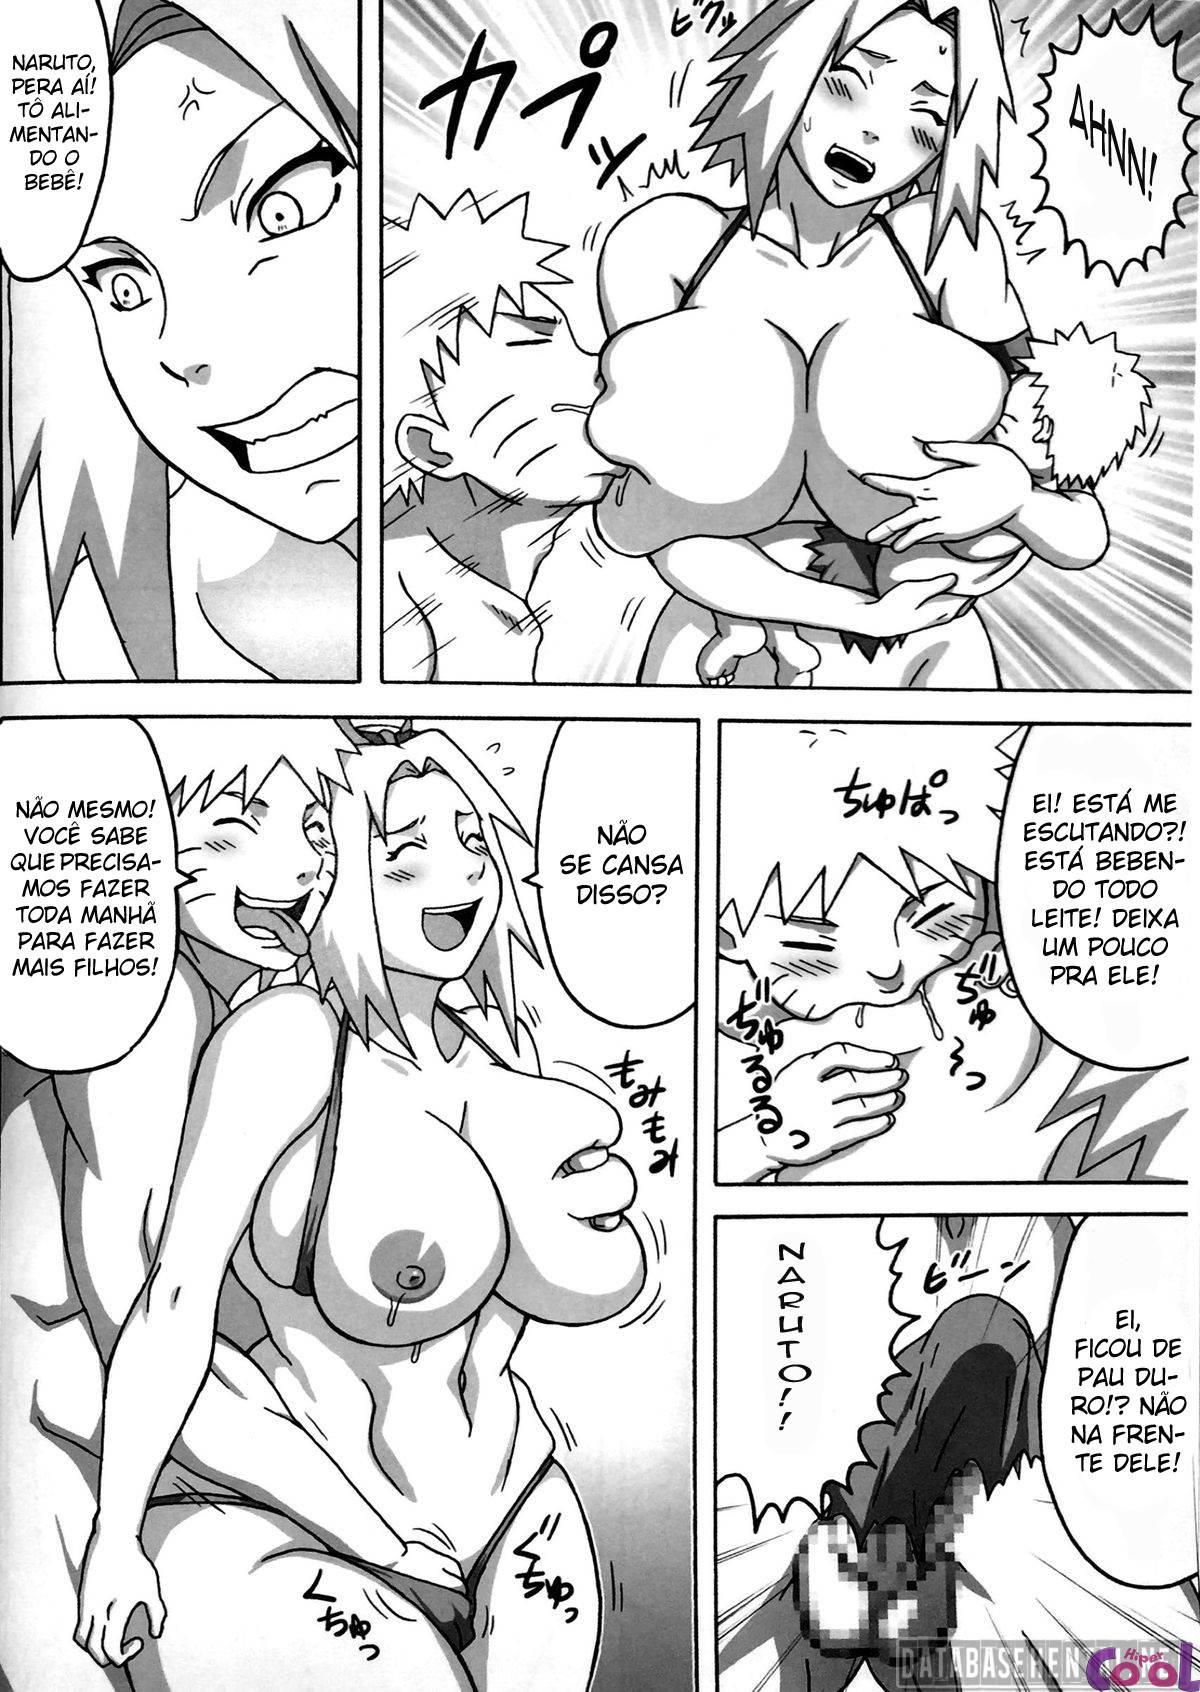 jungle-go-chapter-01-page-03.jpg